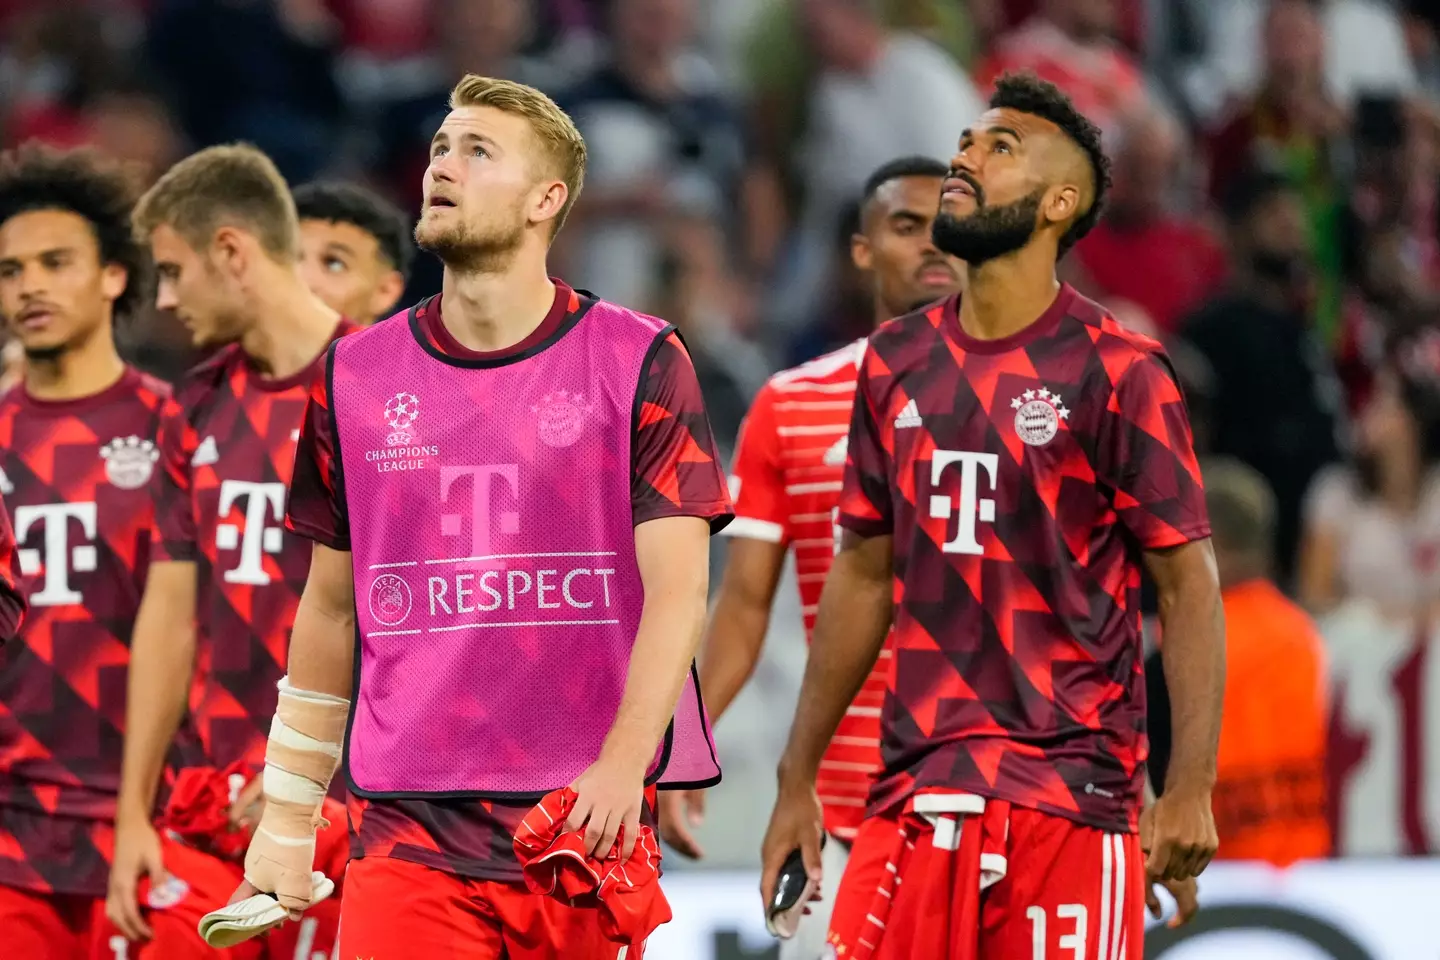 De Ligt and Choupo-Moting are on United's radar. (Image